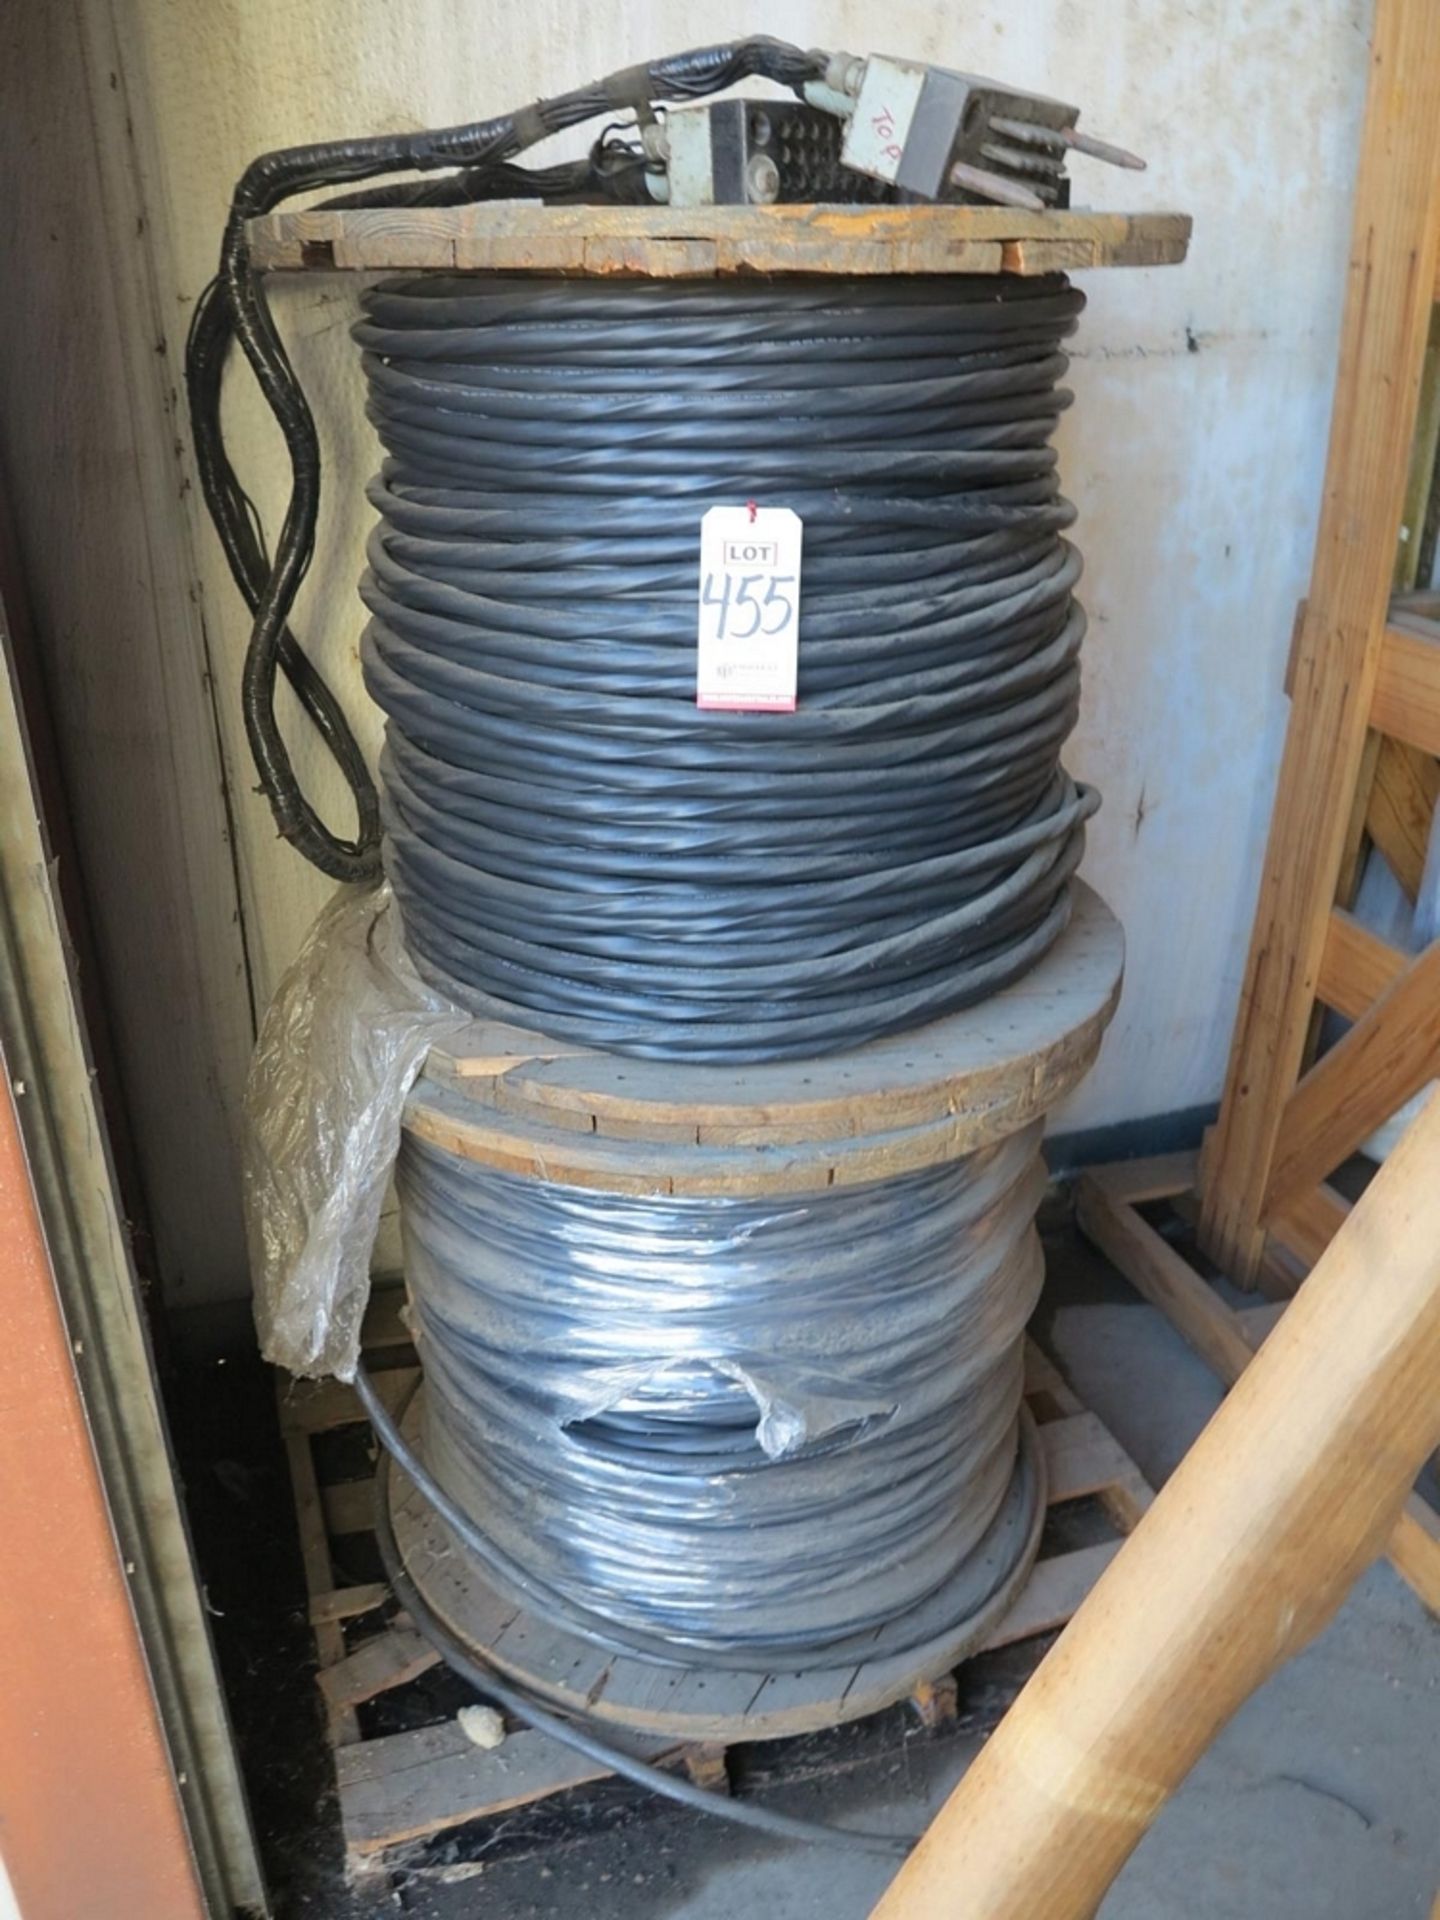 LOT - (4) SPOOLS OF HIGH VOLTAGE ELECTRIC CABLE